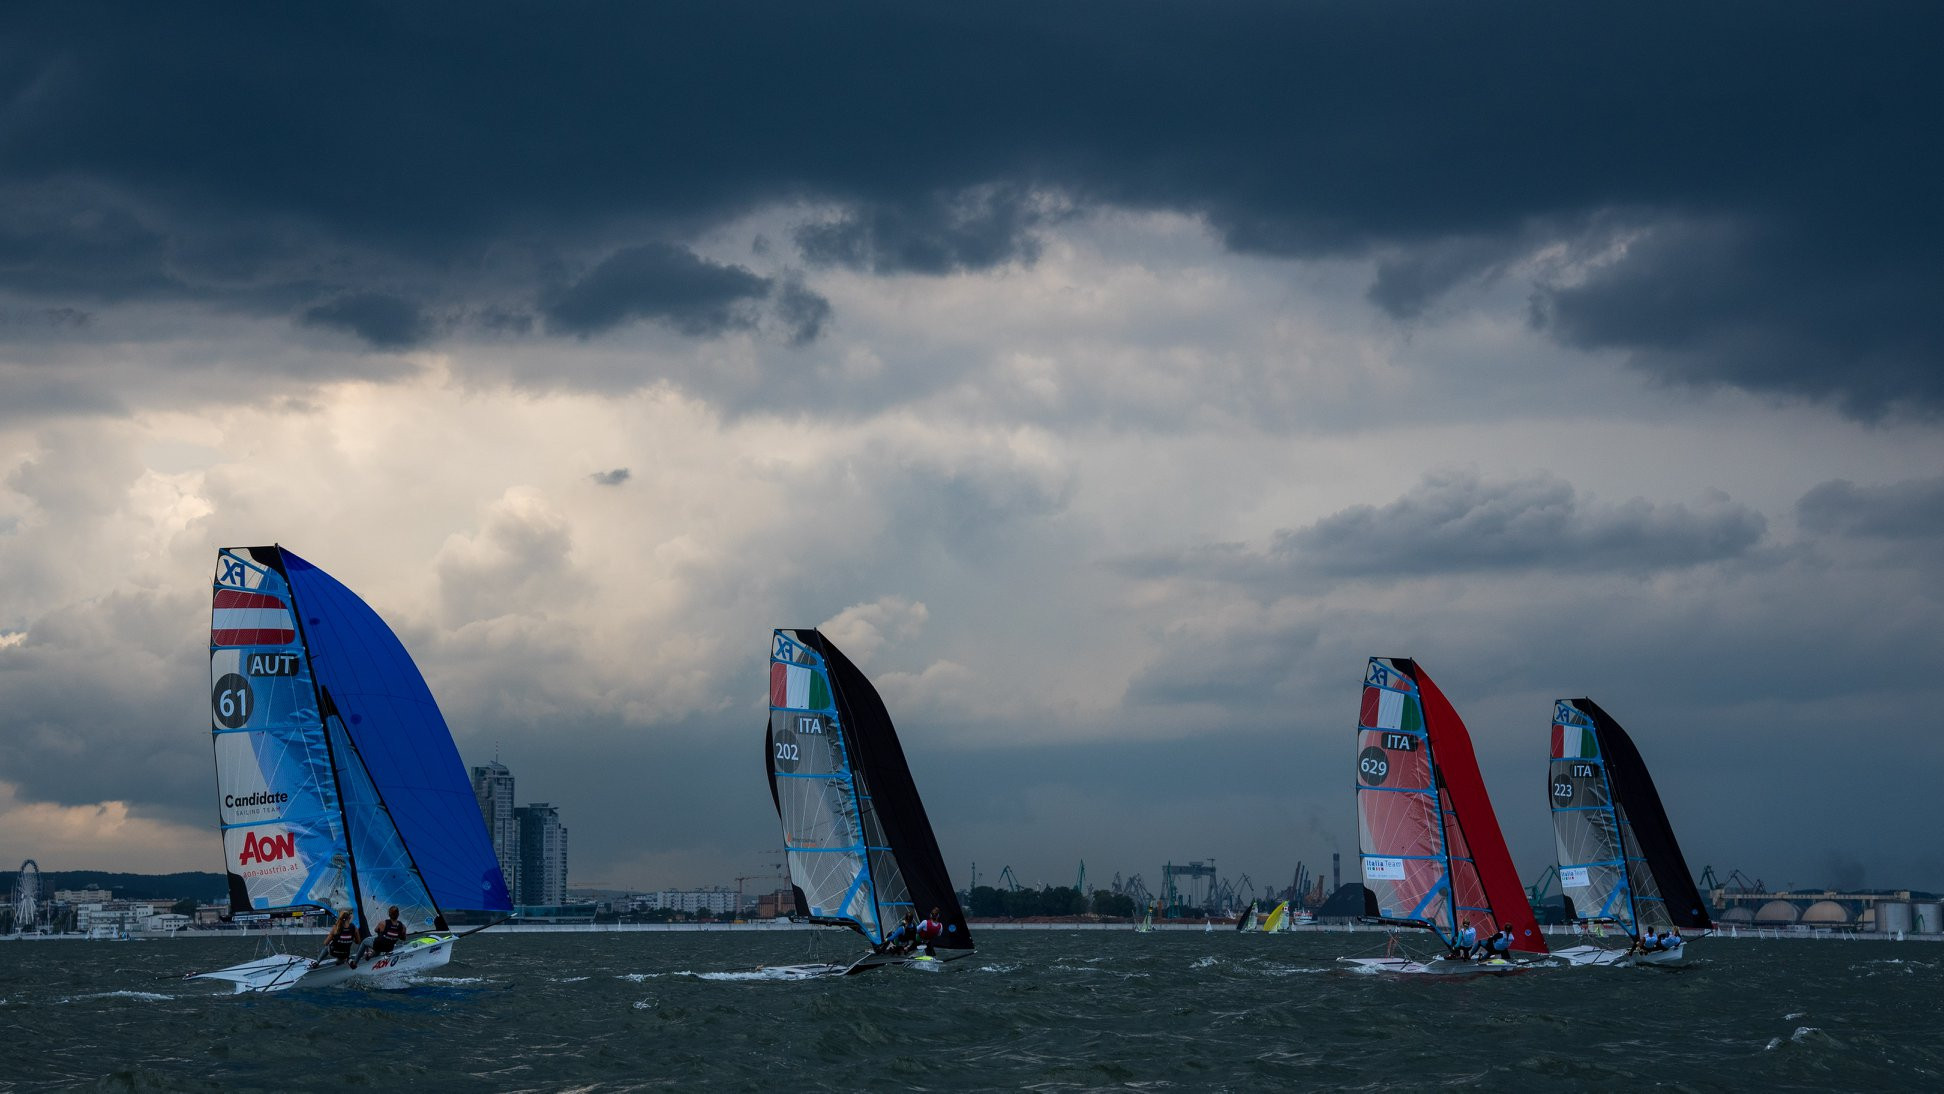 Action continued today at the 49er European Championships ©World Sailing